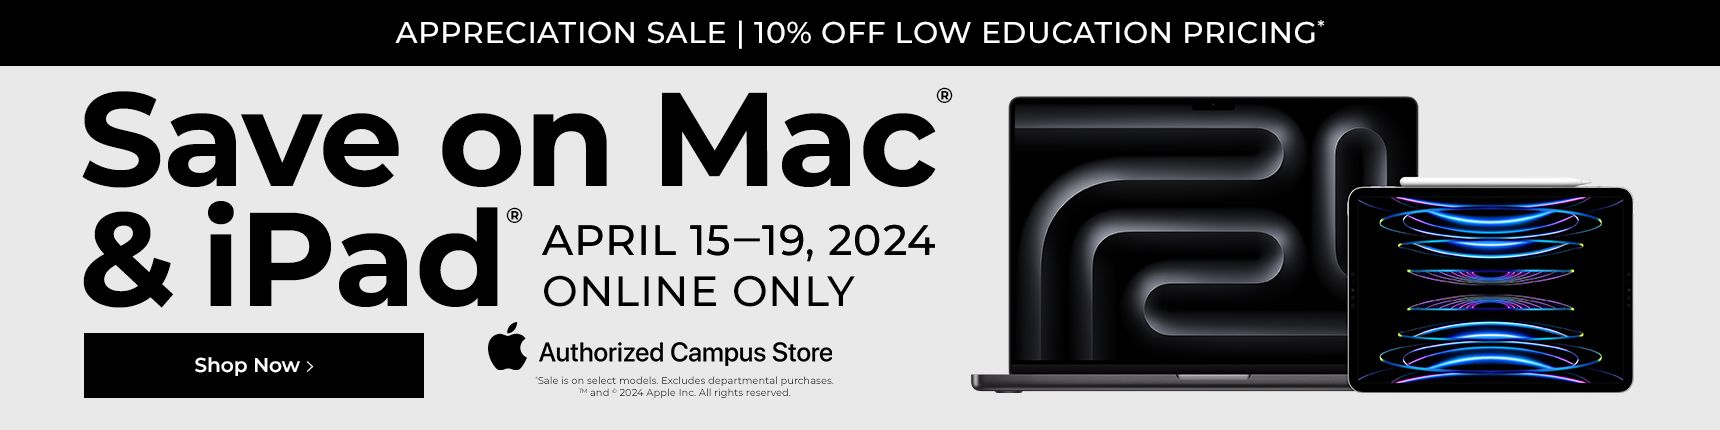 Online Only. Appreciation Sale. 10%off low education pricing. Save on Mac & iPad. April 15-19,2024. Authorized campus store.